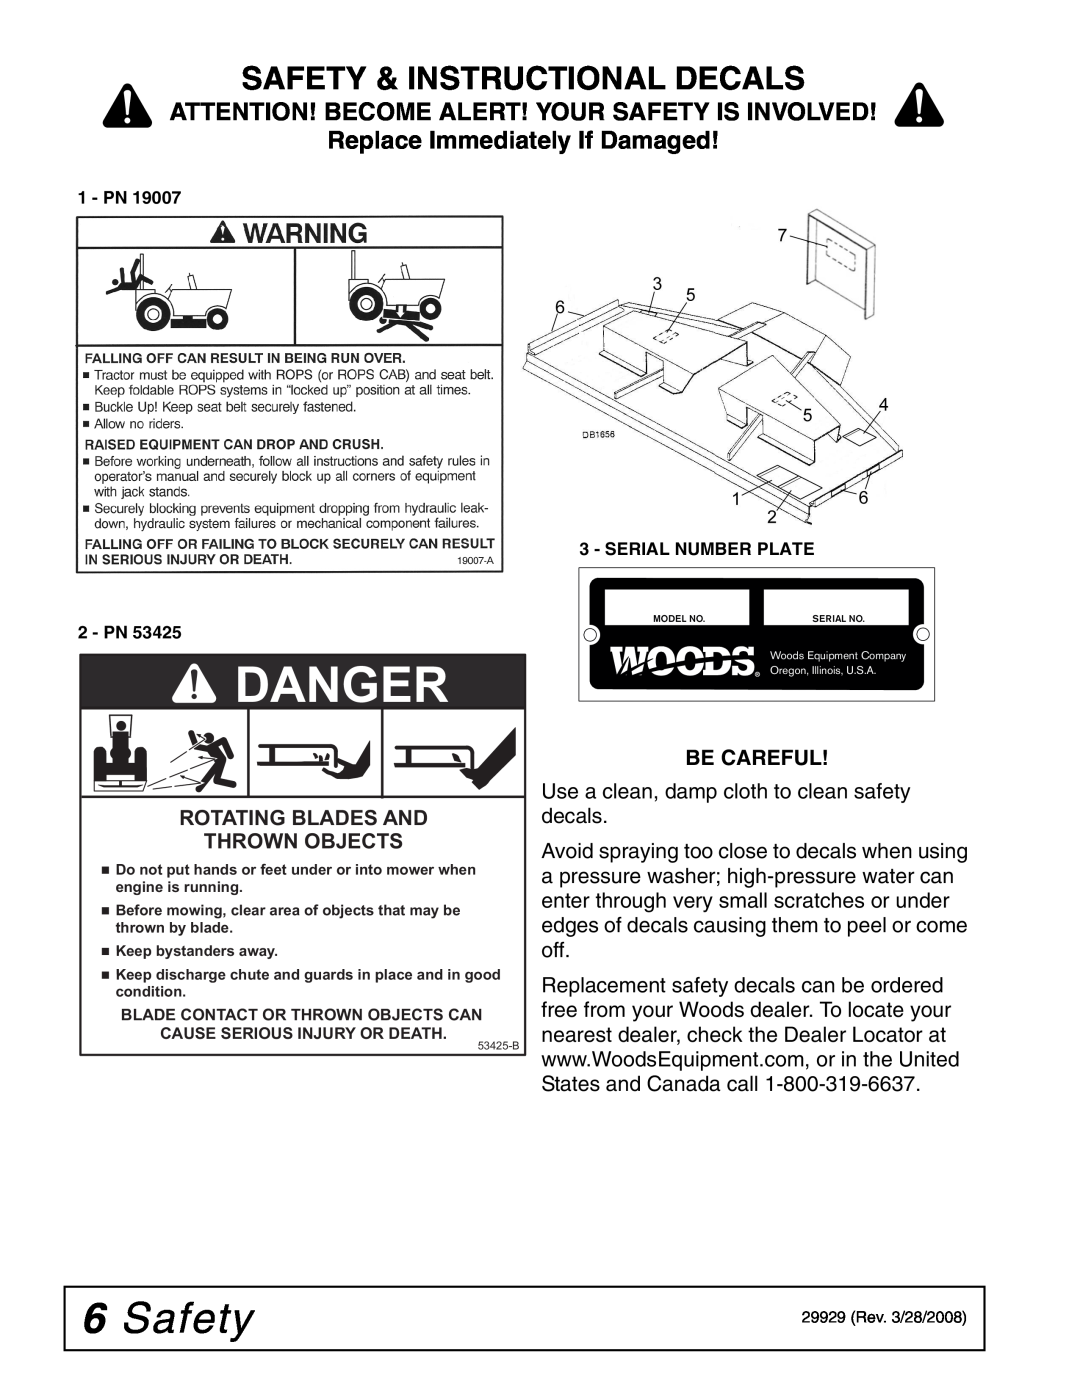 Woods Equipment 59CLF-4 Safety & Instructional Decals, Replace Immediately If Damaged, Be Careful, Danger, 53425-B 